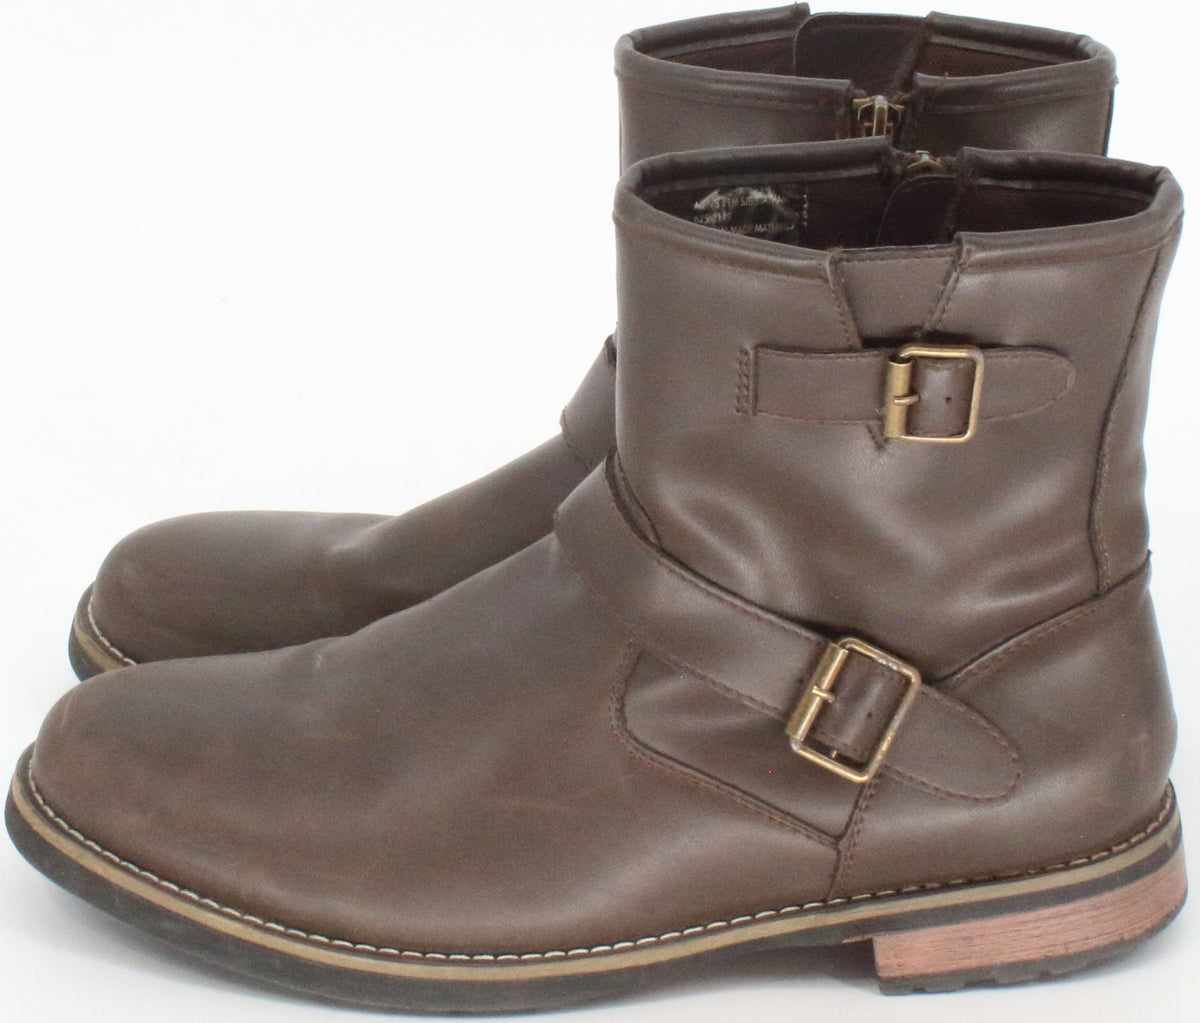 St. John's Bay Brown Leather Boots